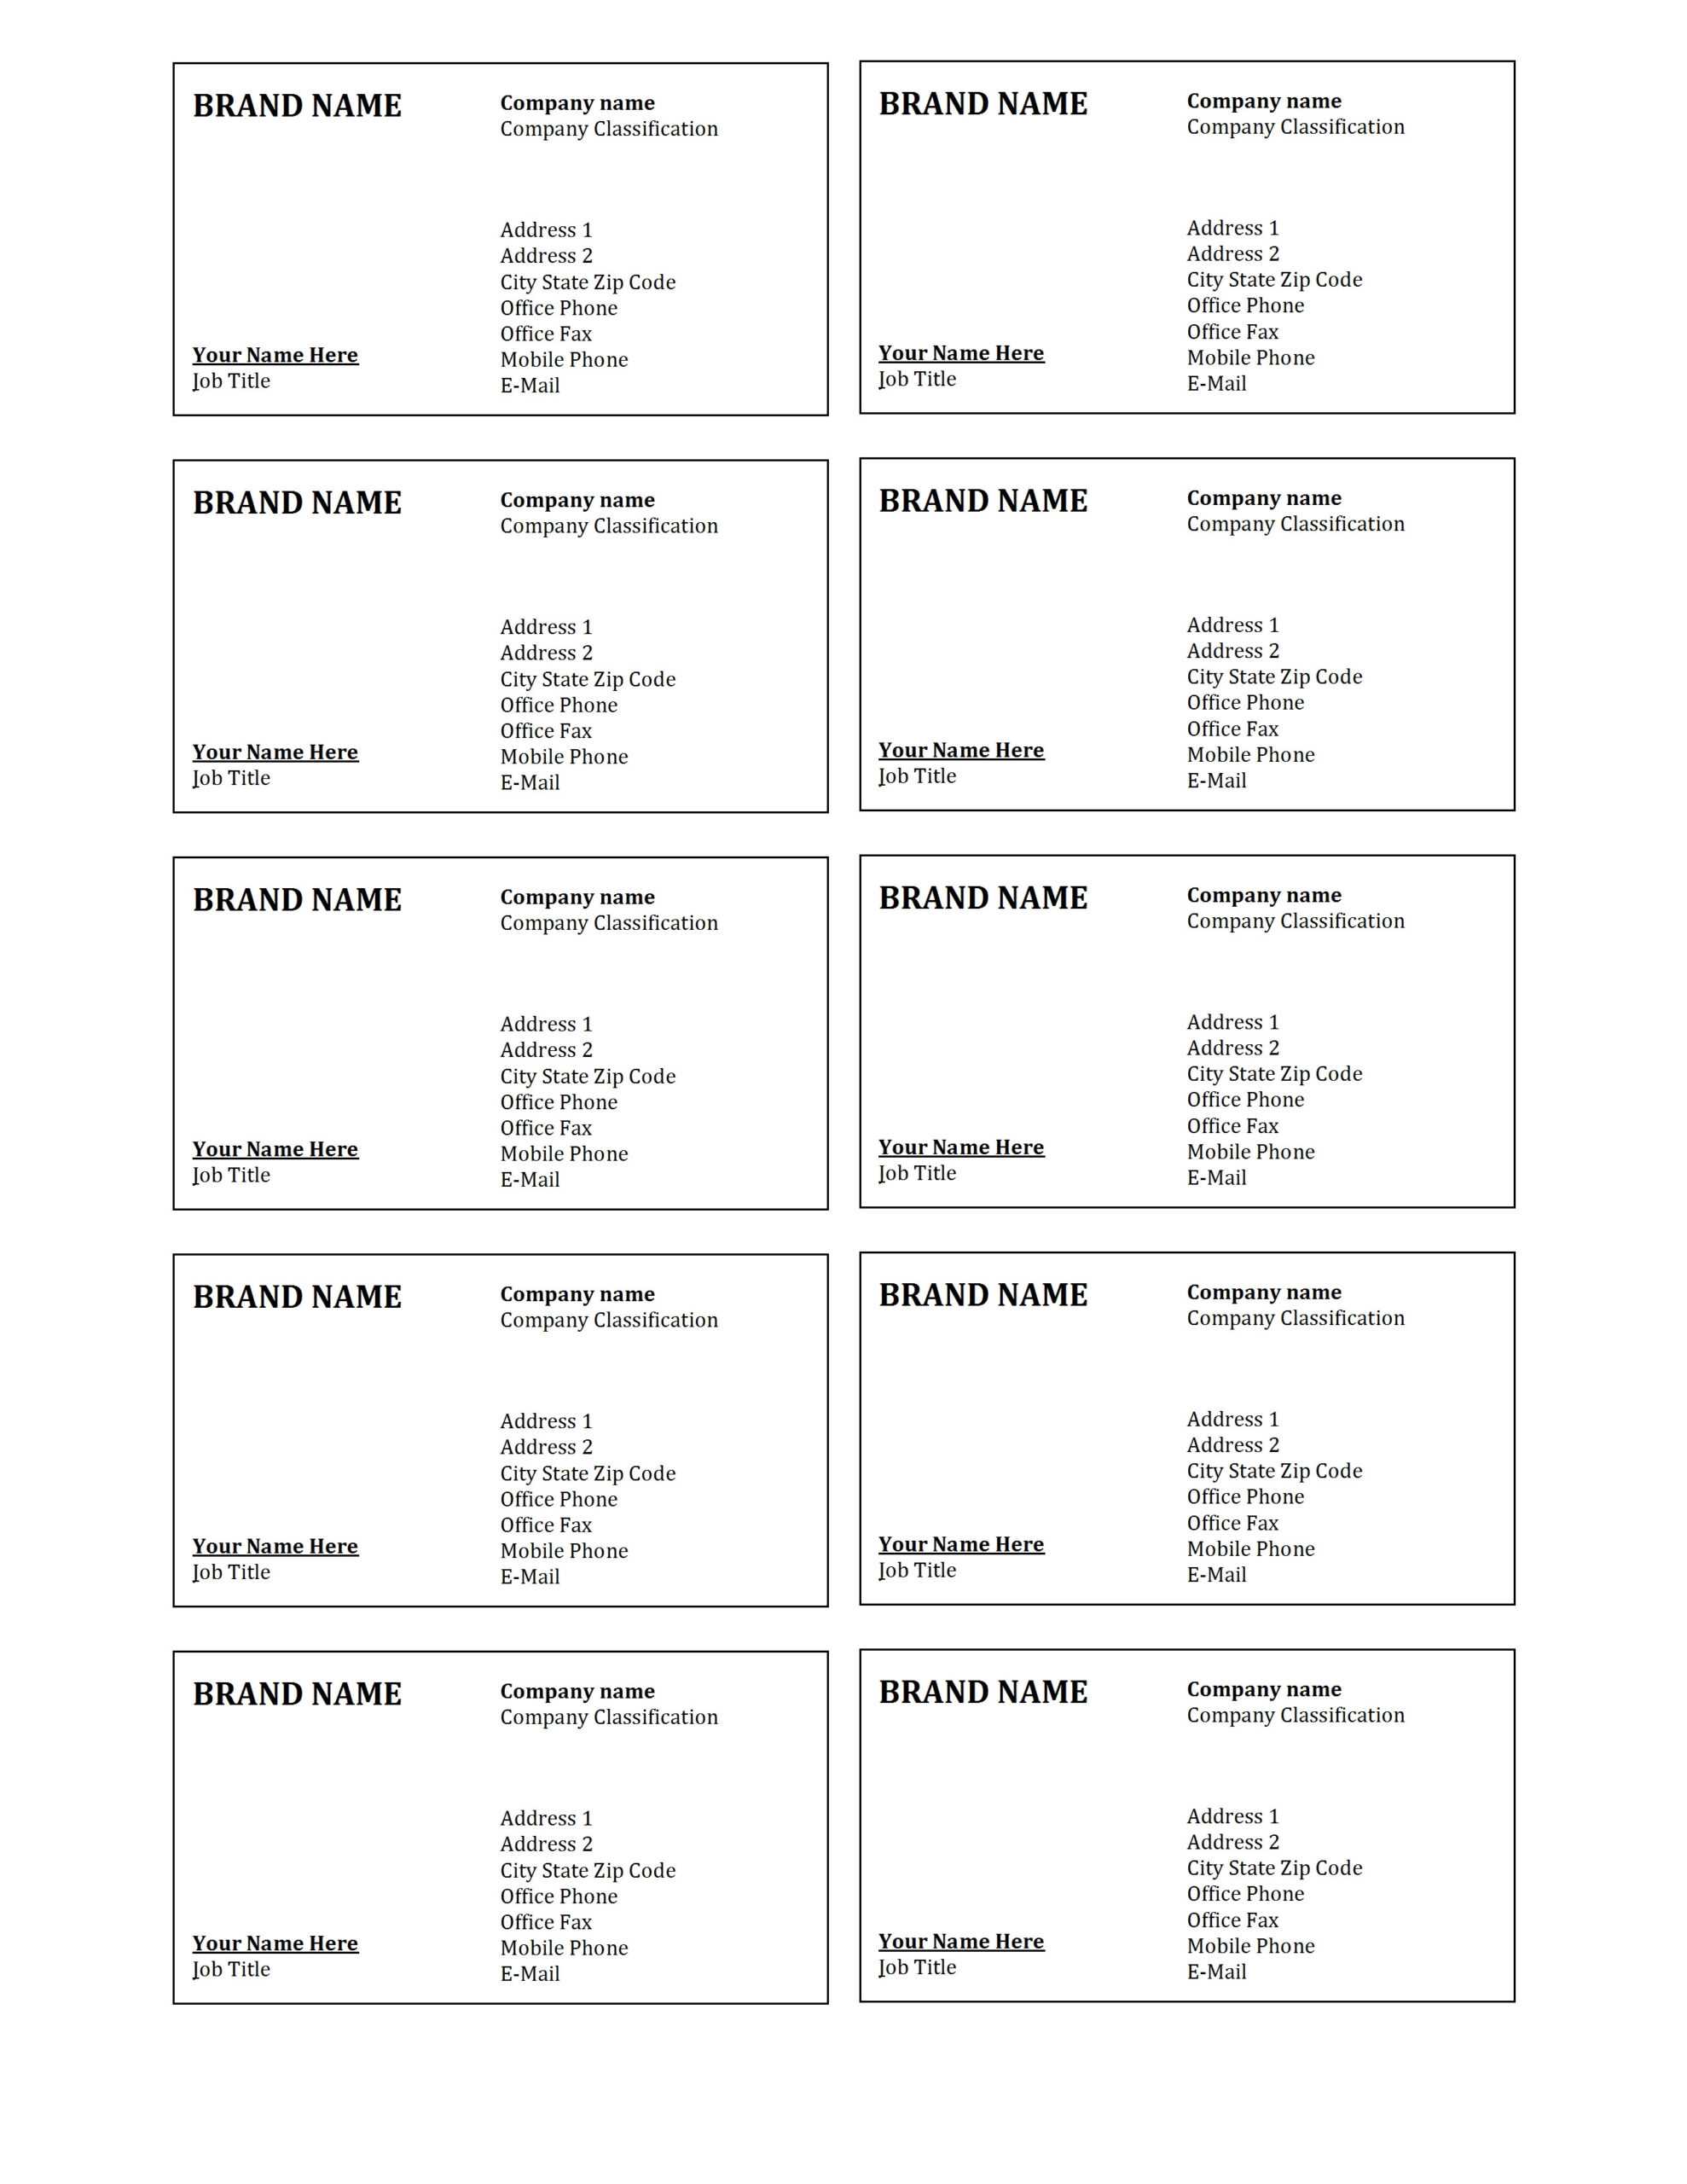 9 Visiting Card Sheet Templates | Fax Cover Sheet Examples With Regard To Microsoft Word Place Card Template